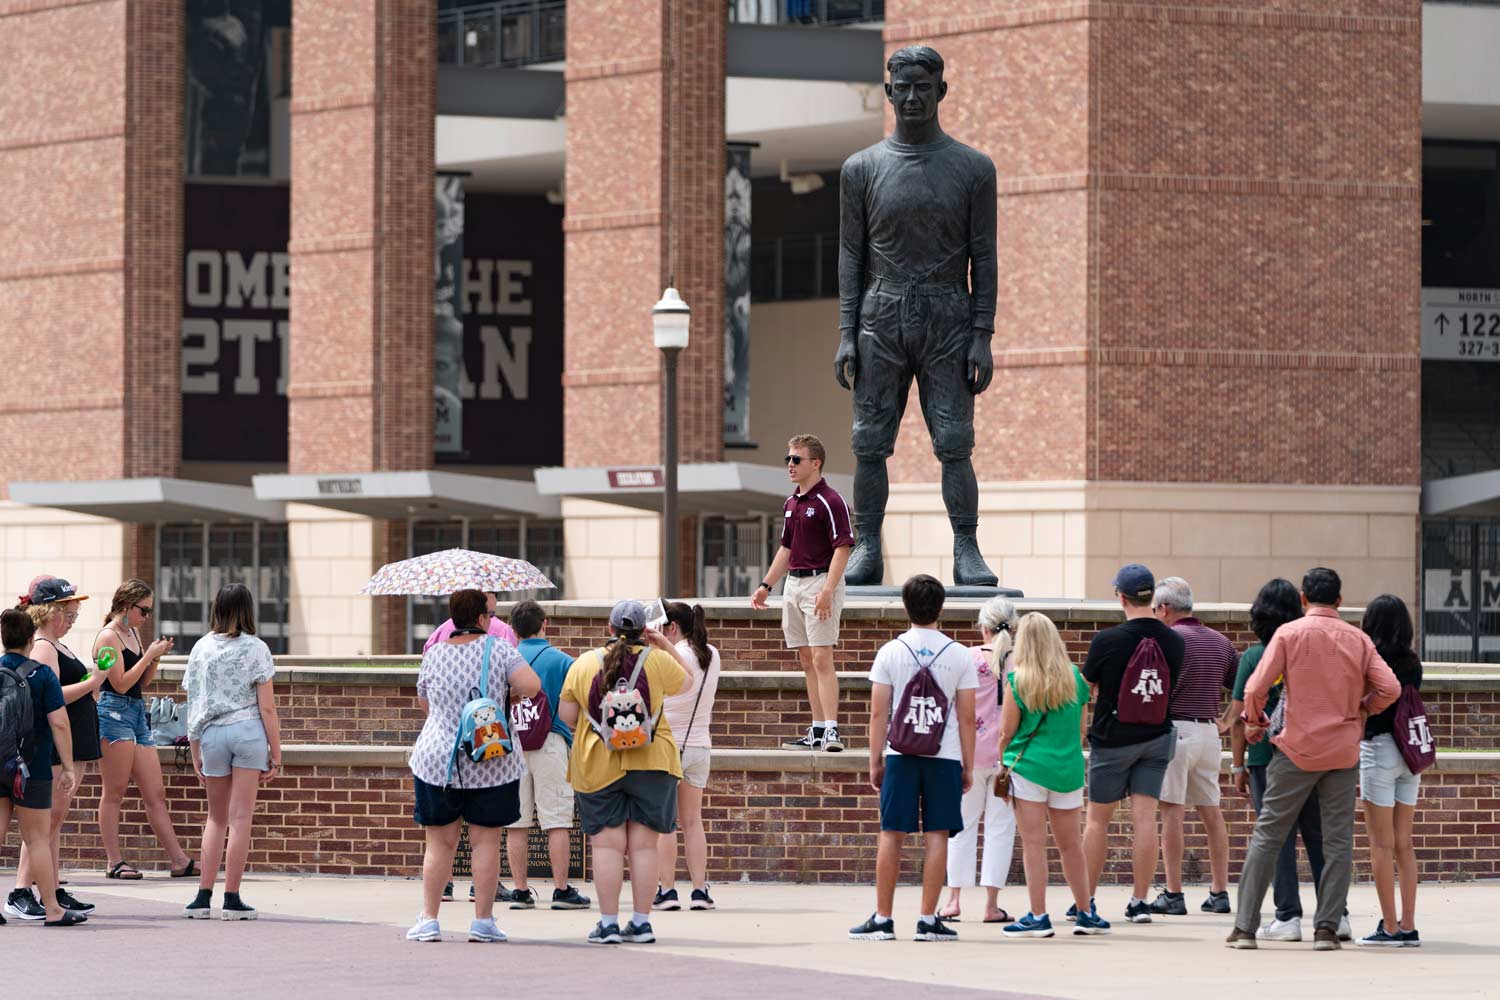 Texas A&M tour guide stands on a bench to address the crowd of prospective students